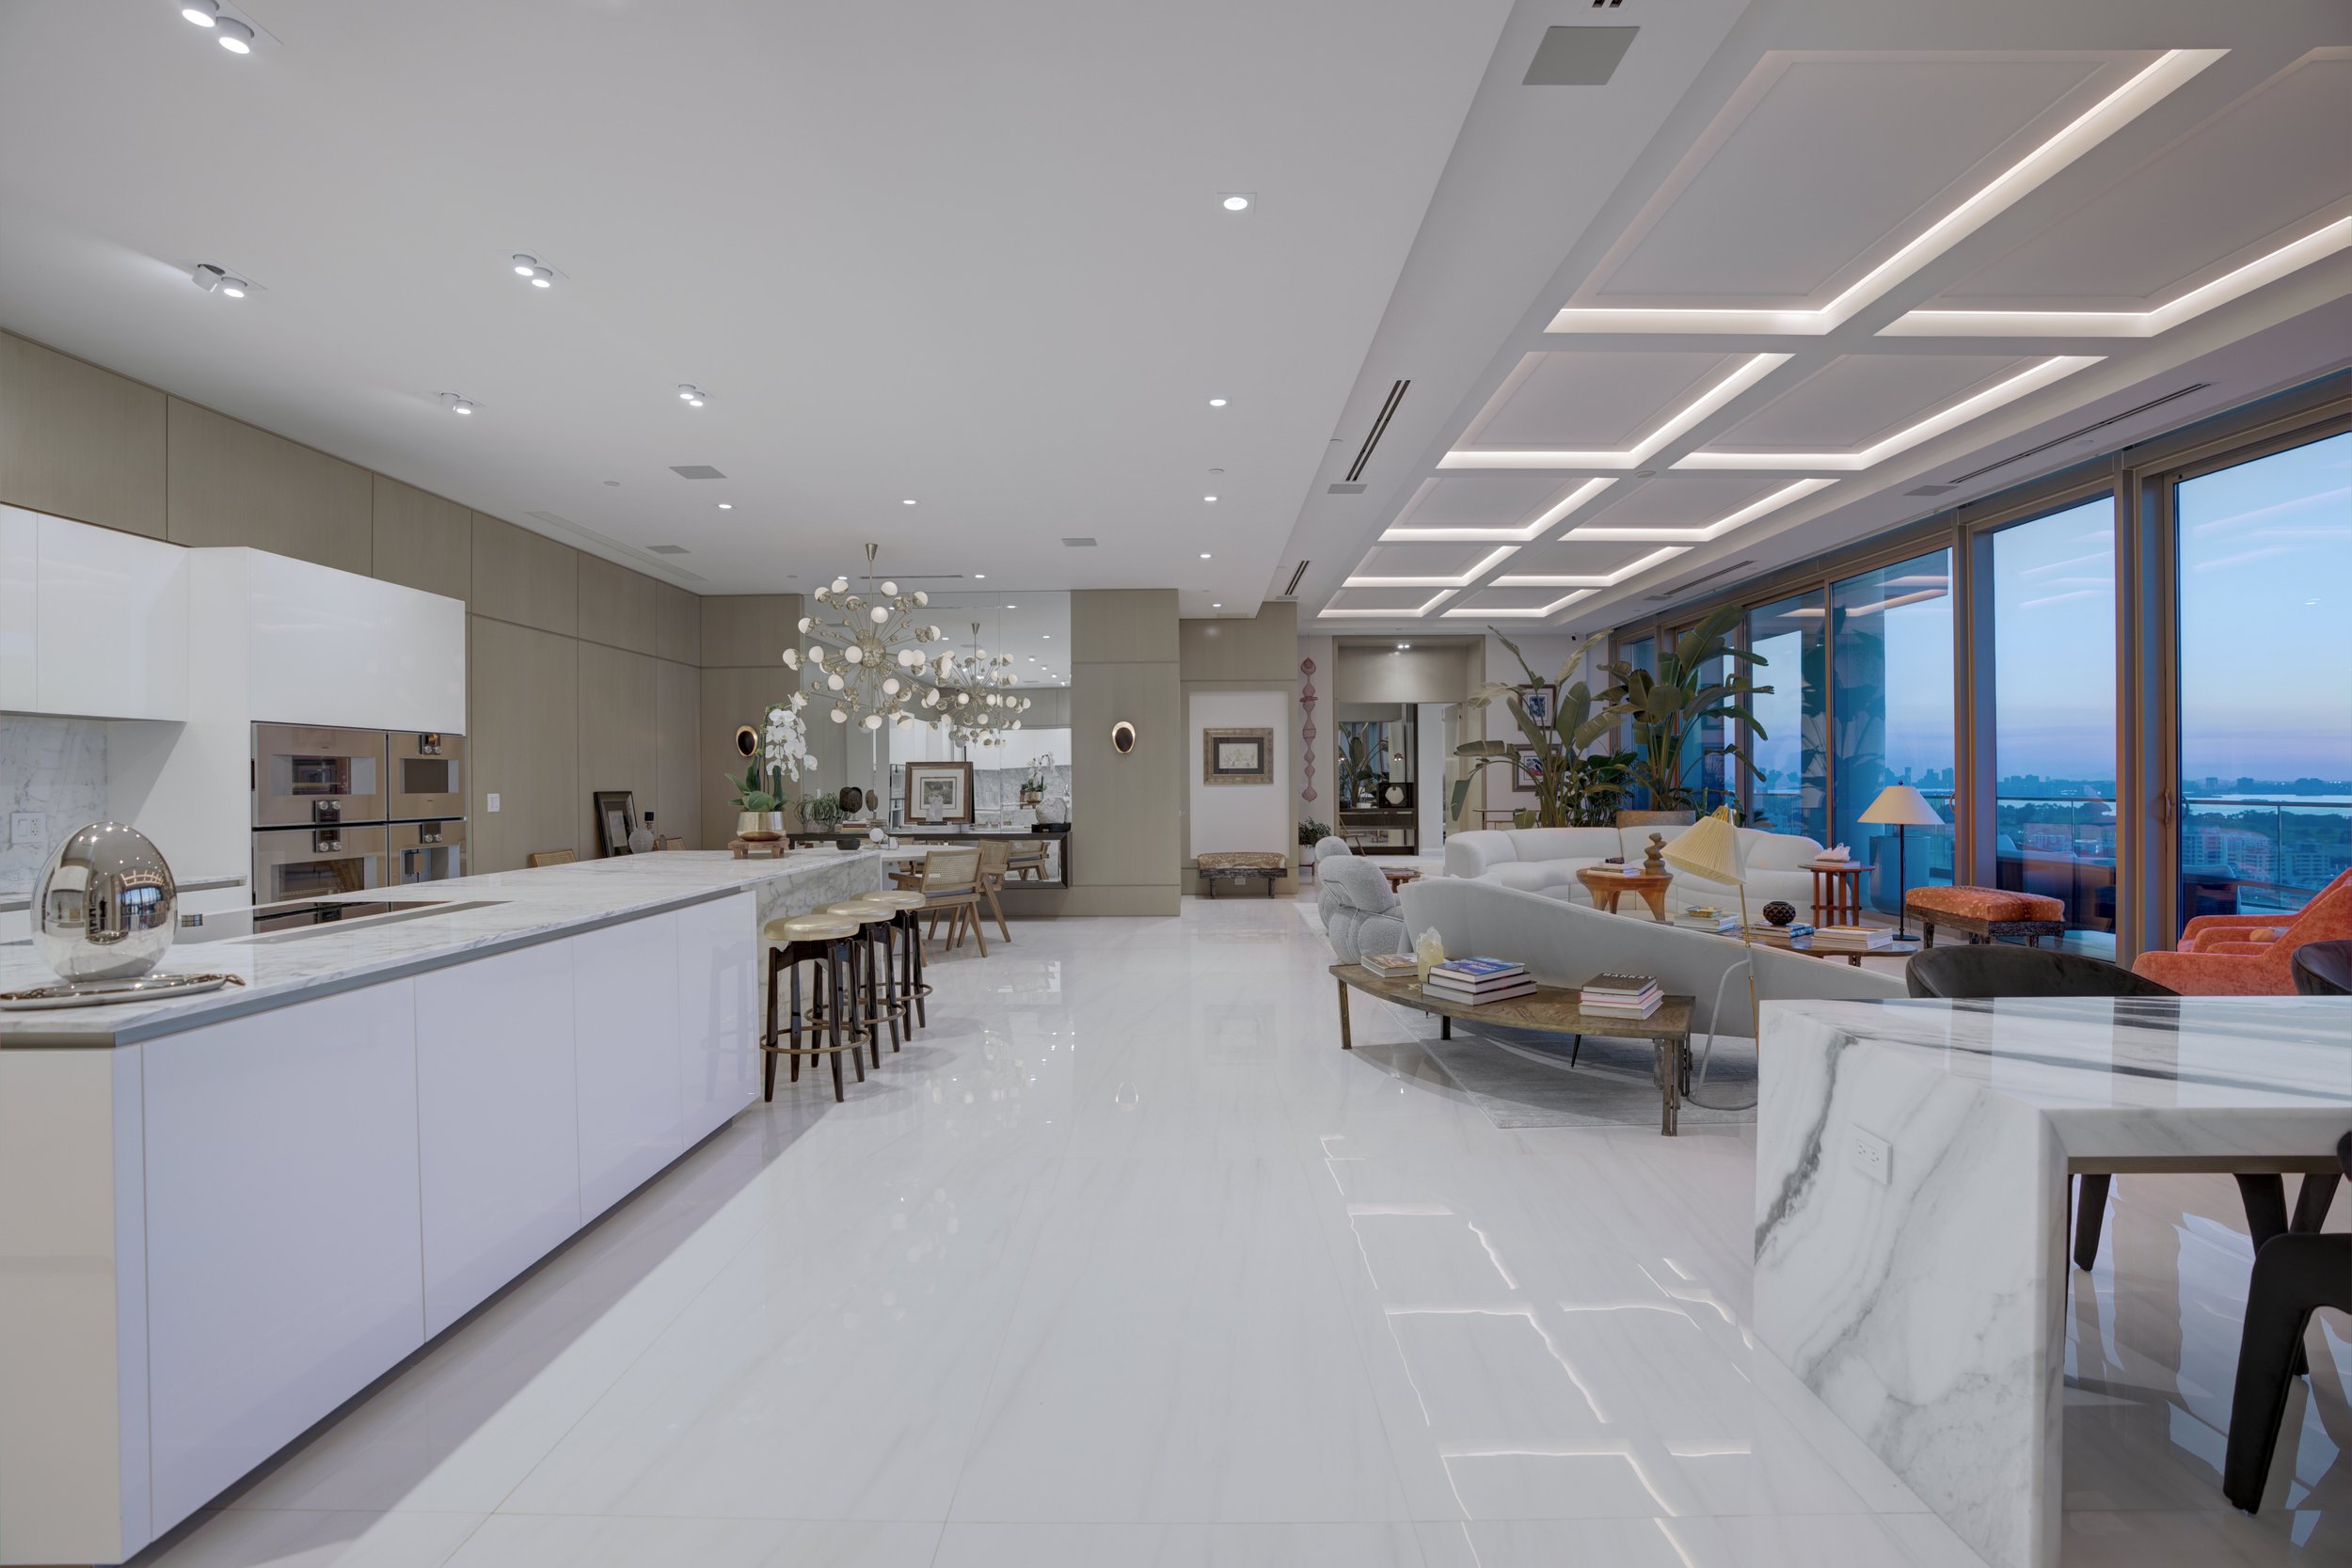 Step Inside This Two-Story Crown Jewel Penthouse At Oceana Bal Harbour Asking $25 Million 23.jpg